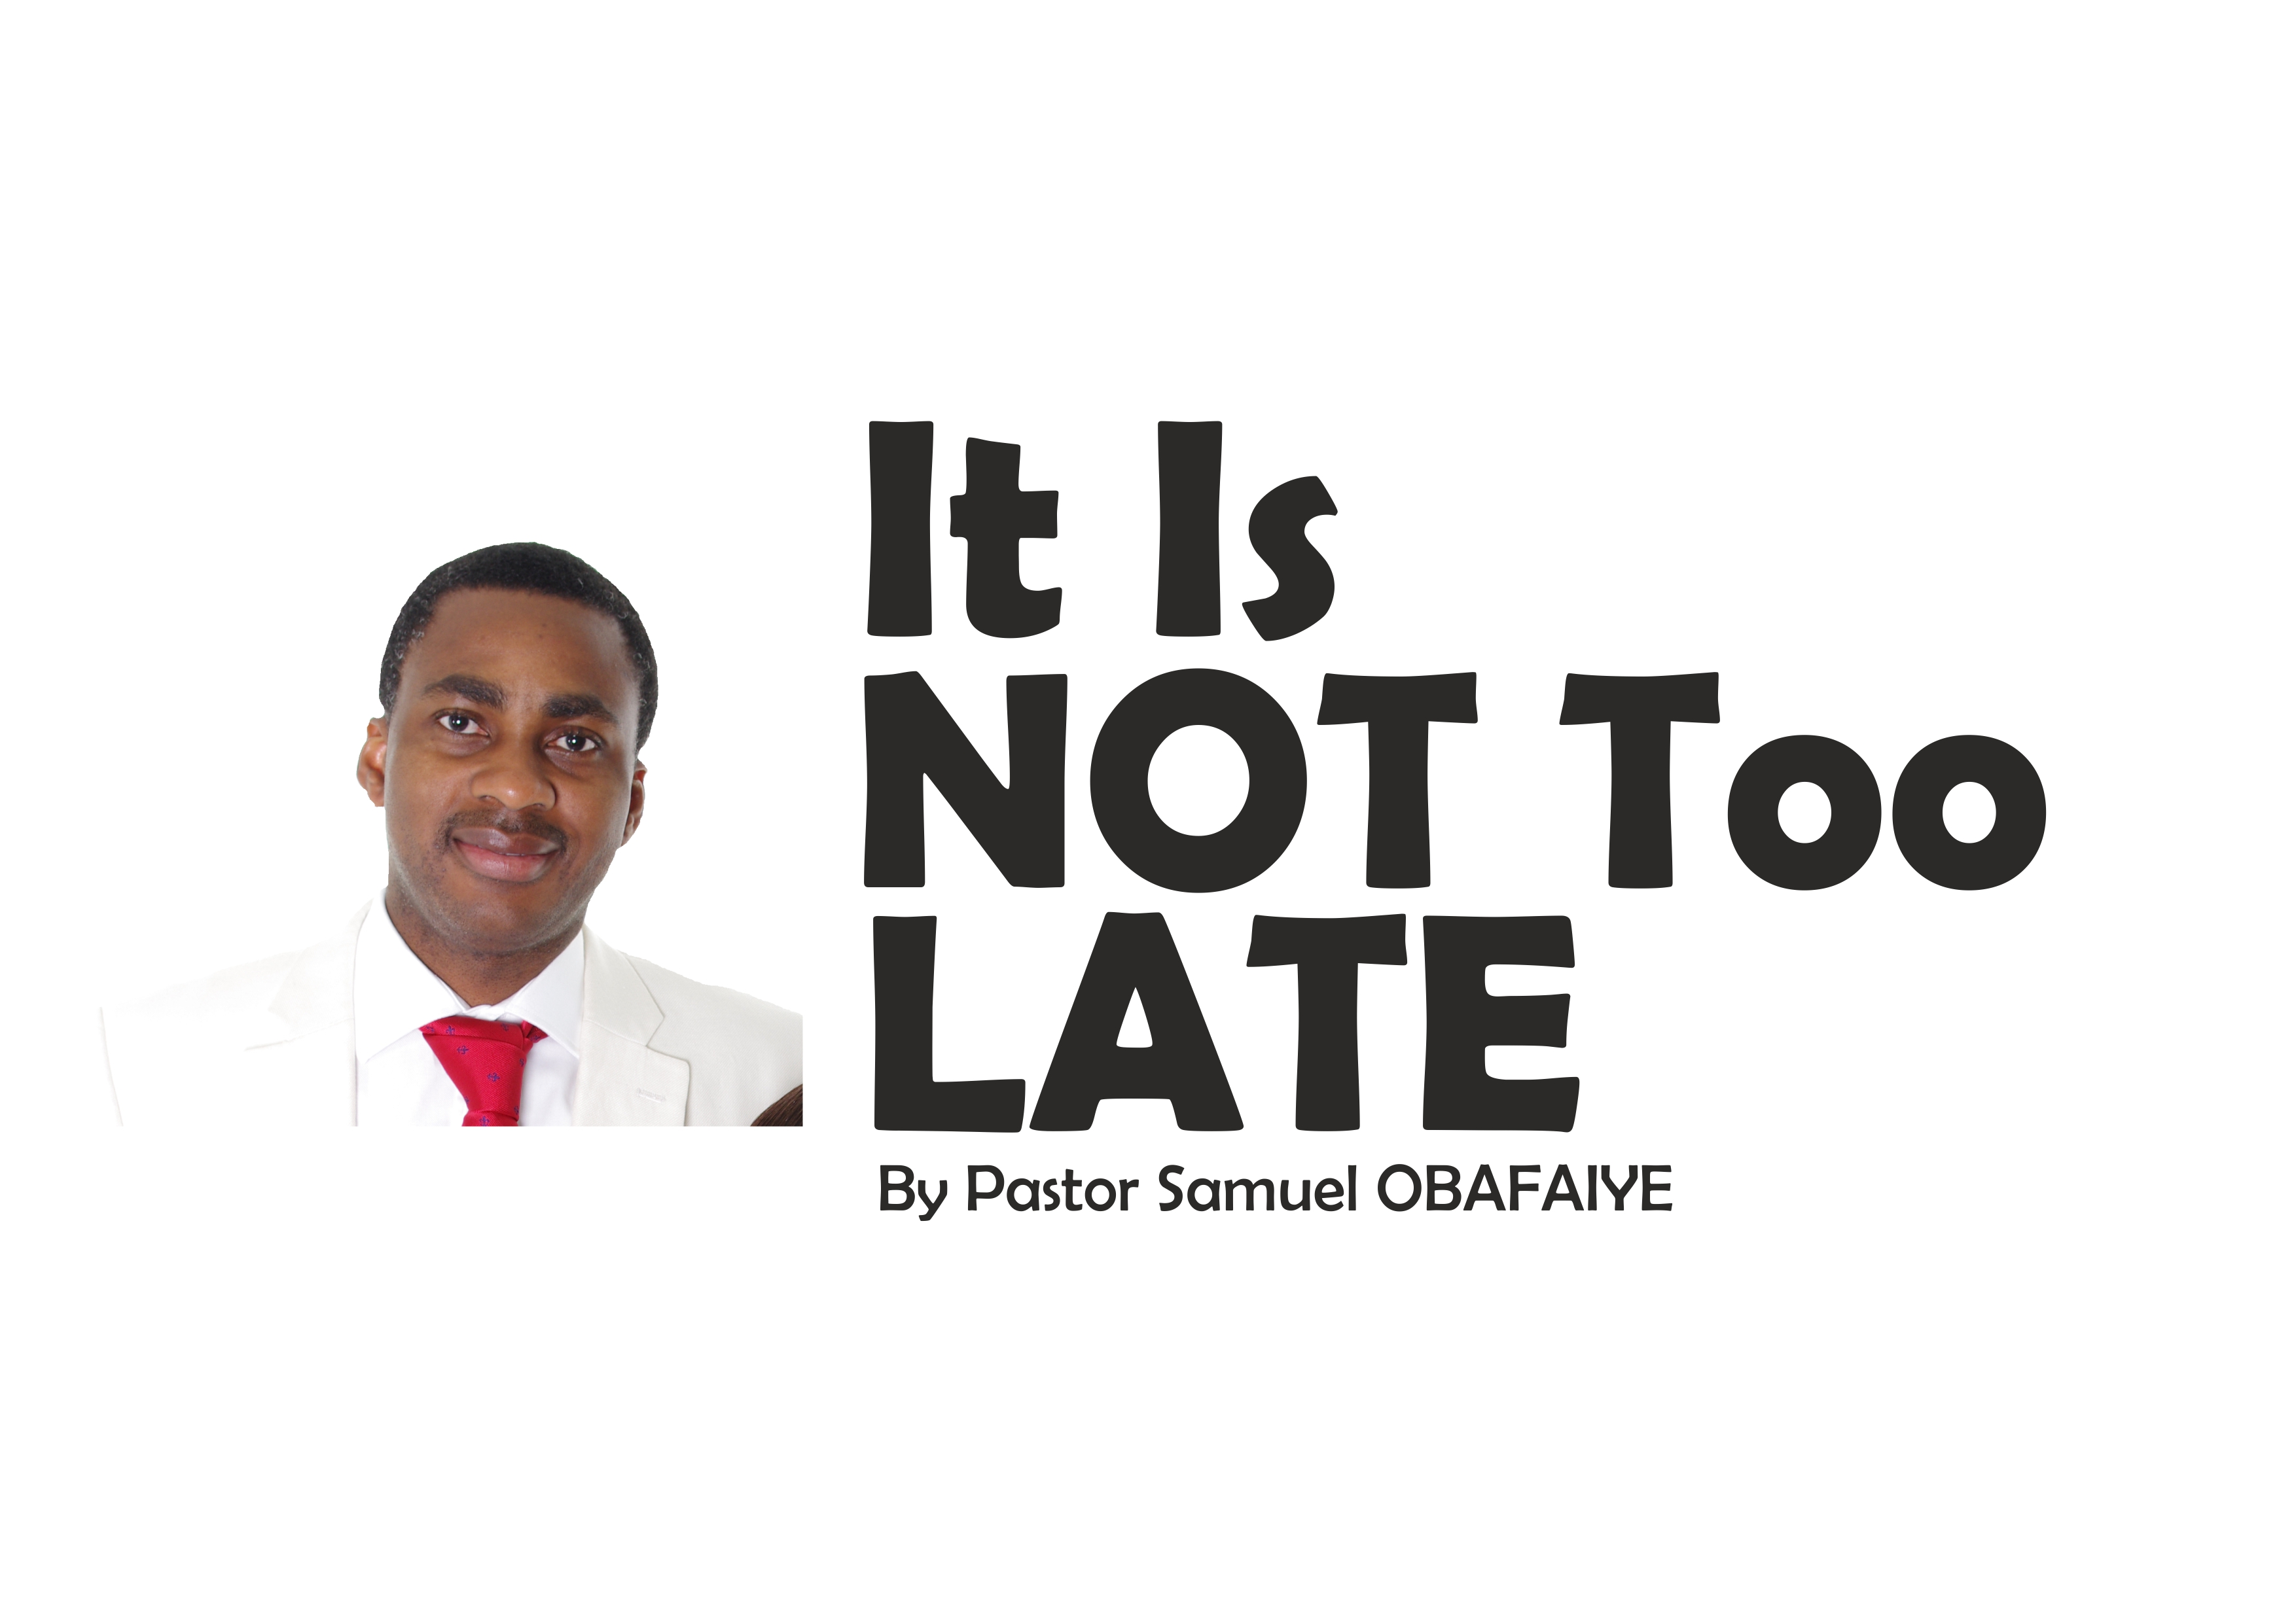 It Is Not Too Late, by Pastor Samuel Obafaiye